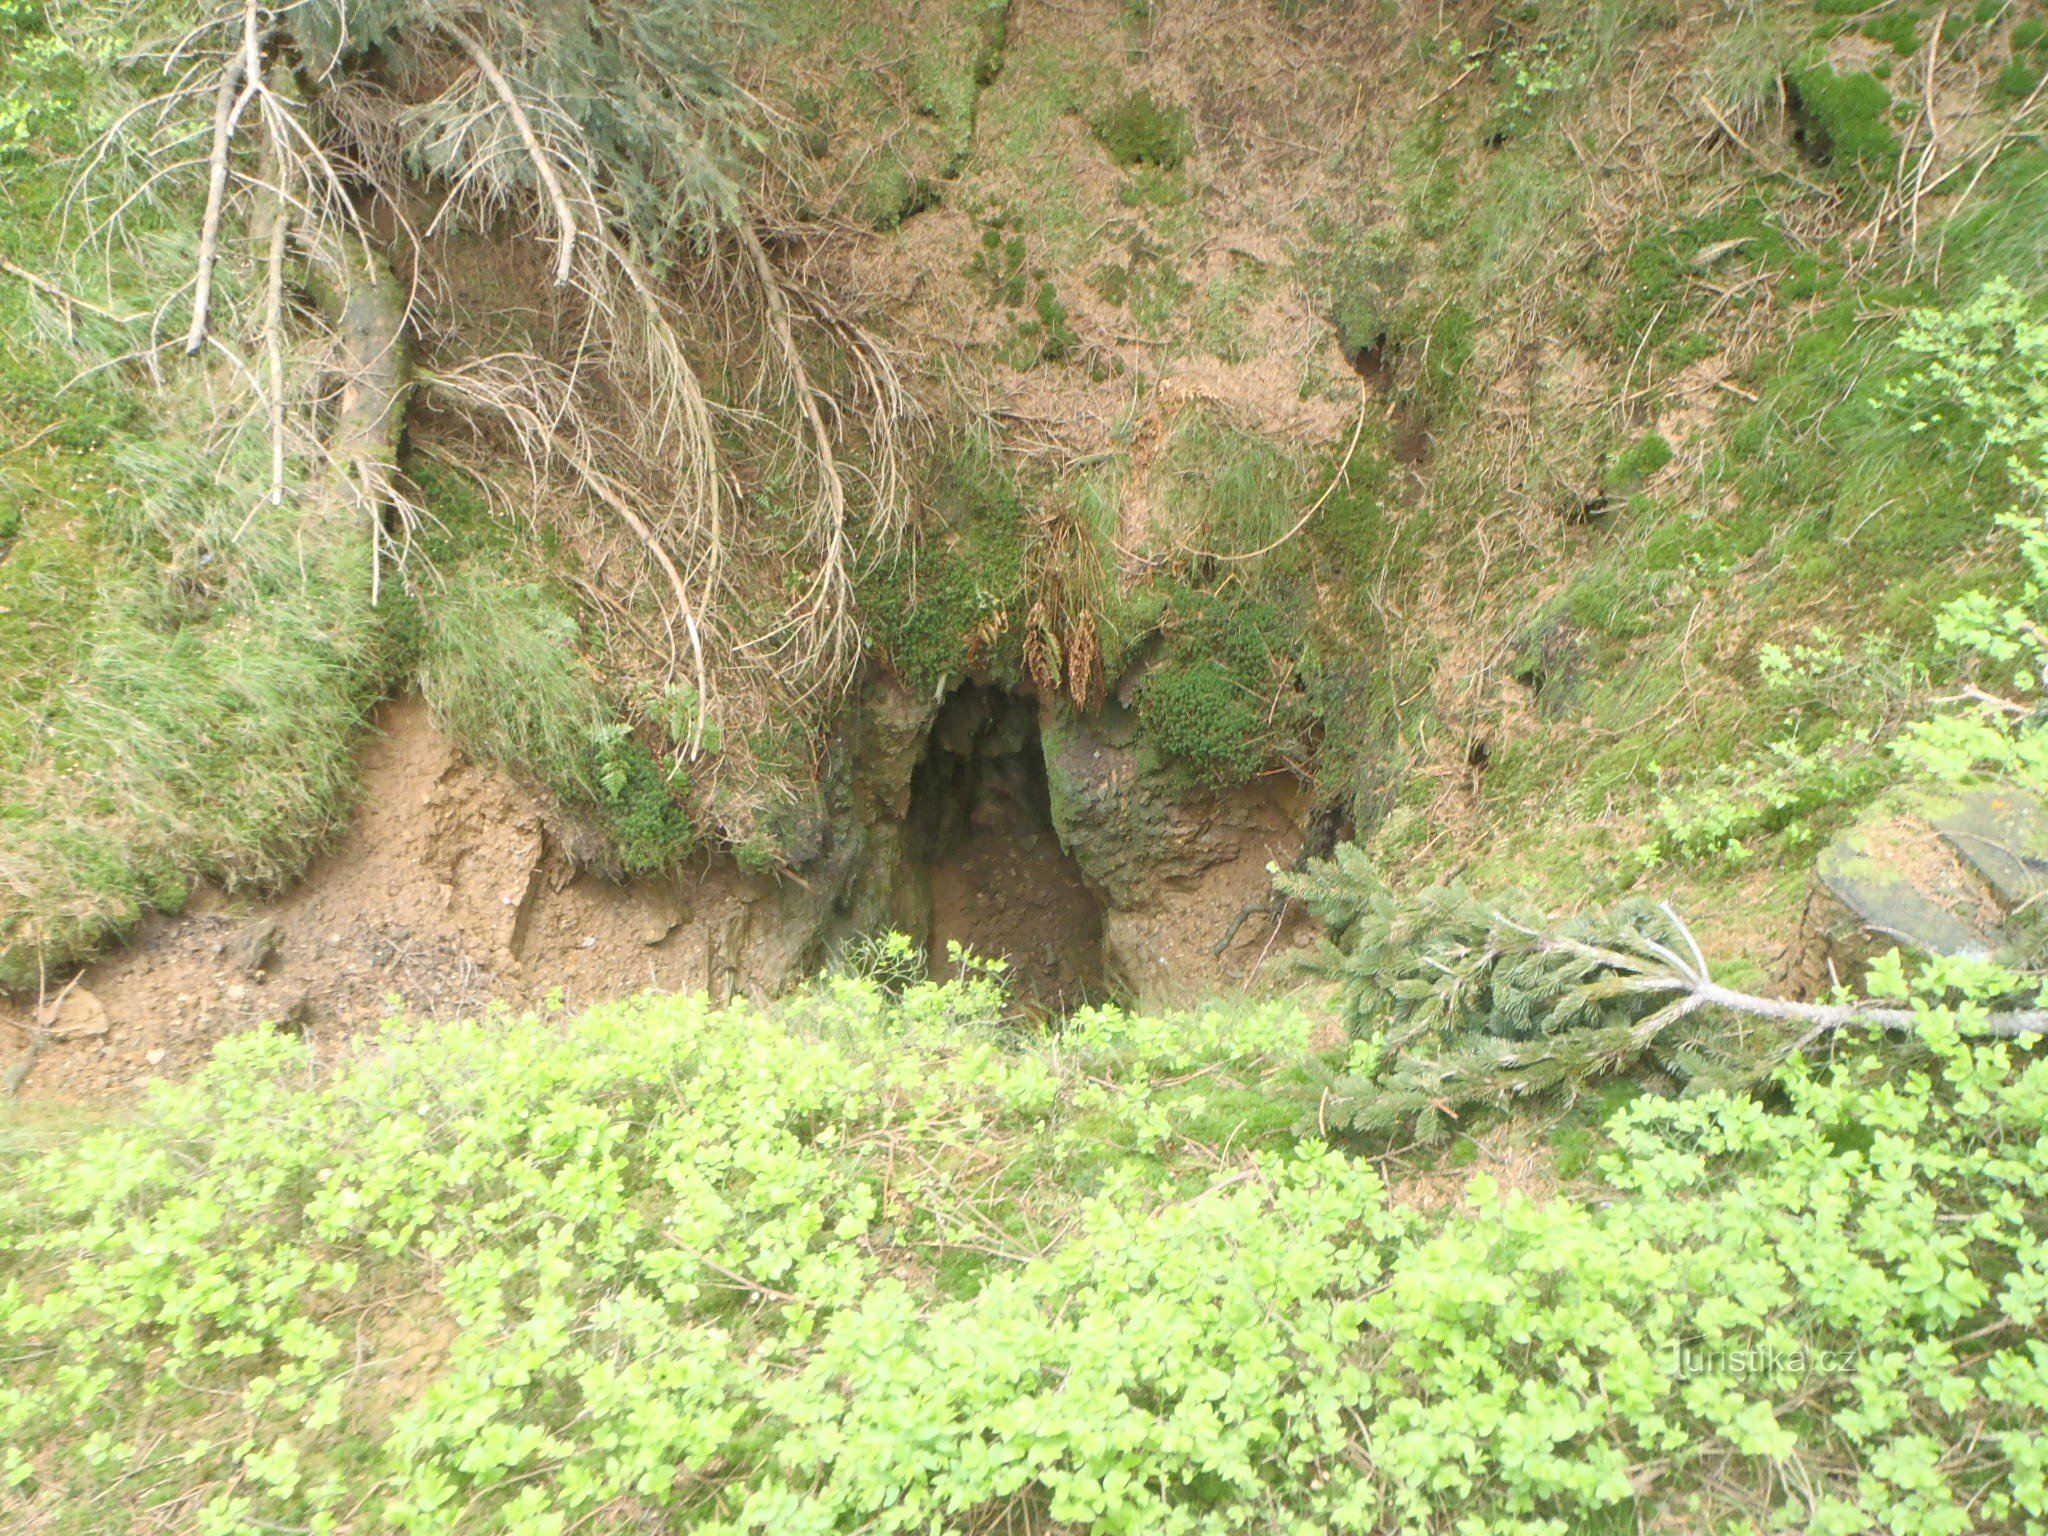 One of the tunnels